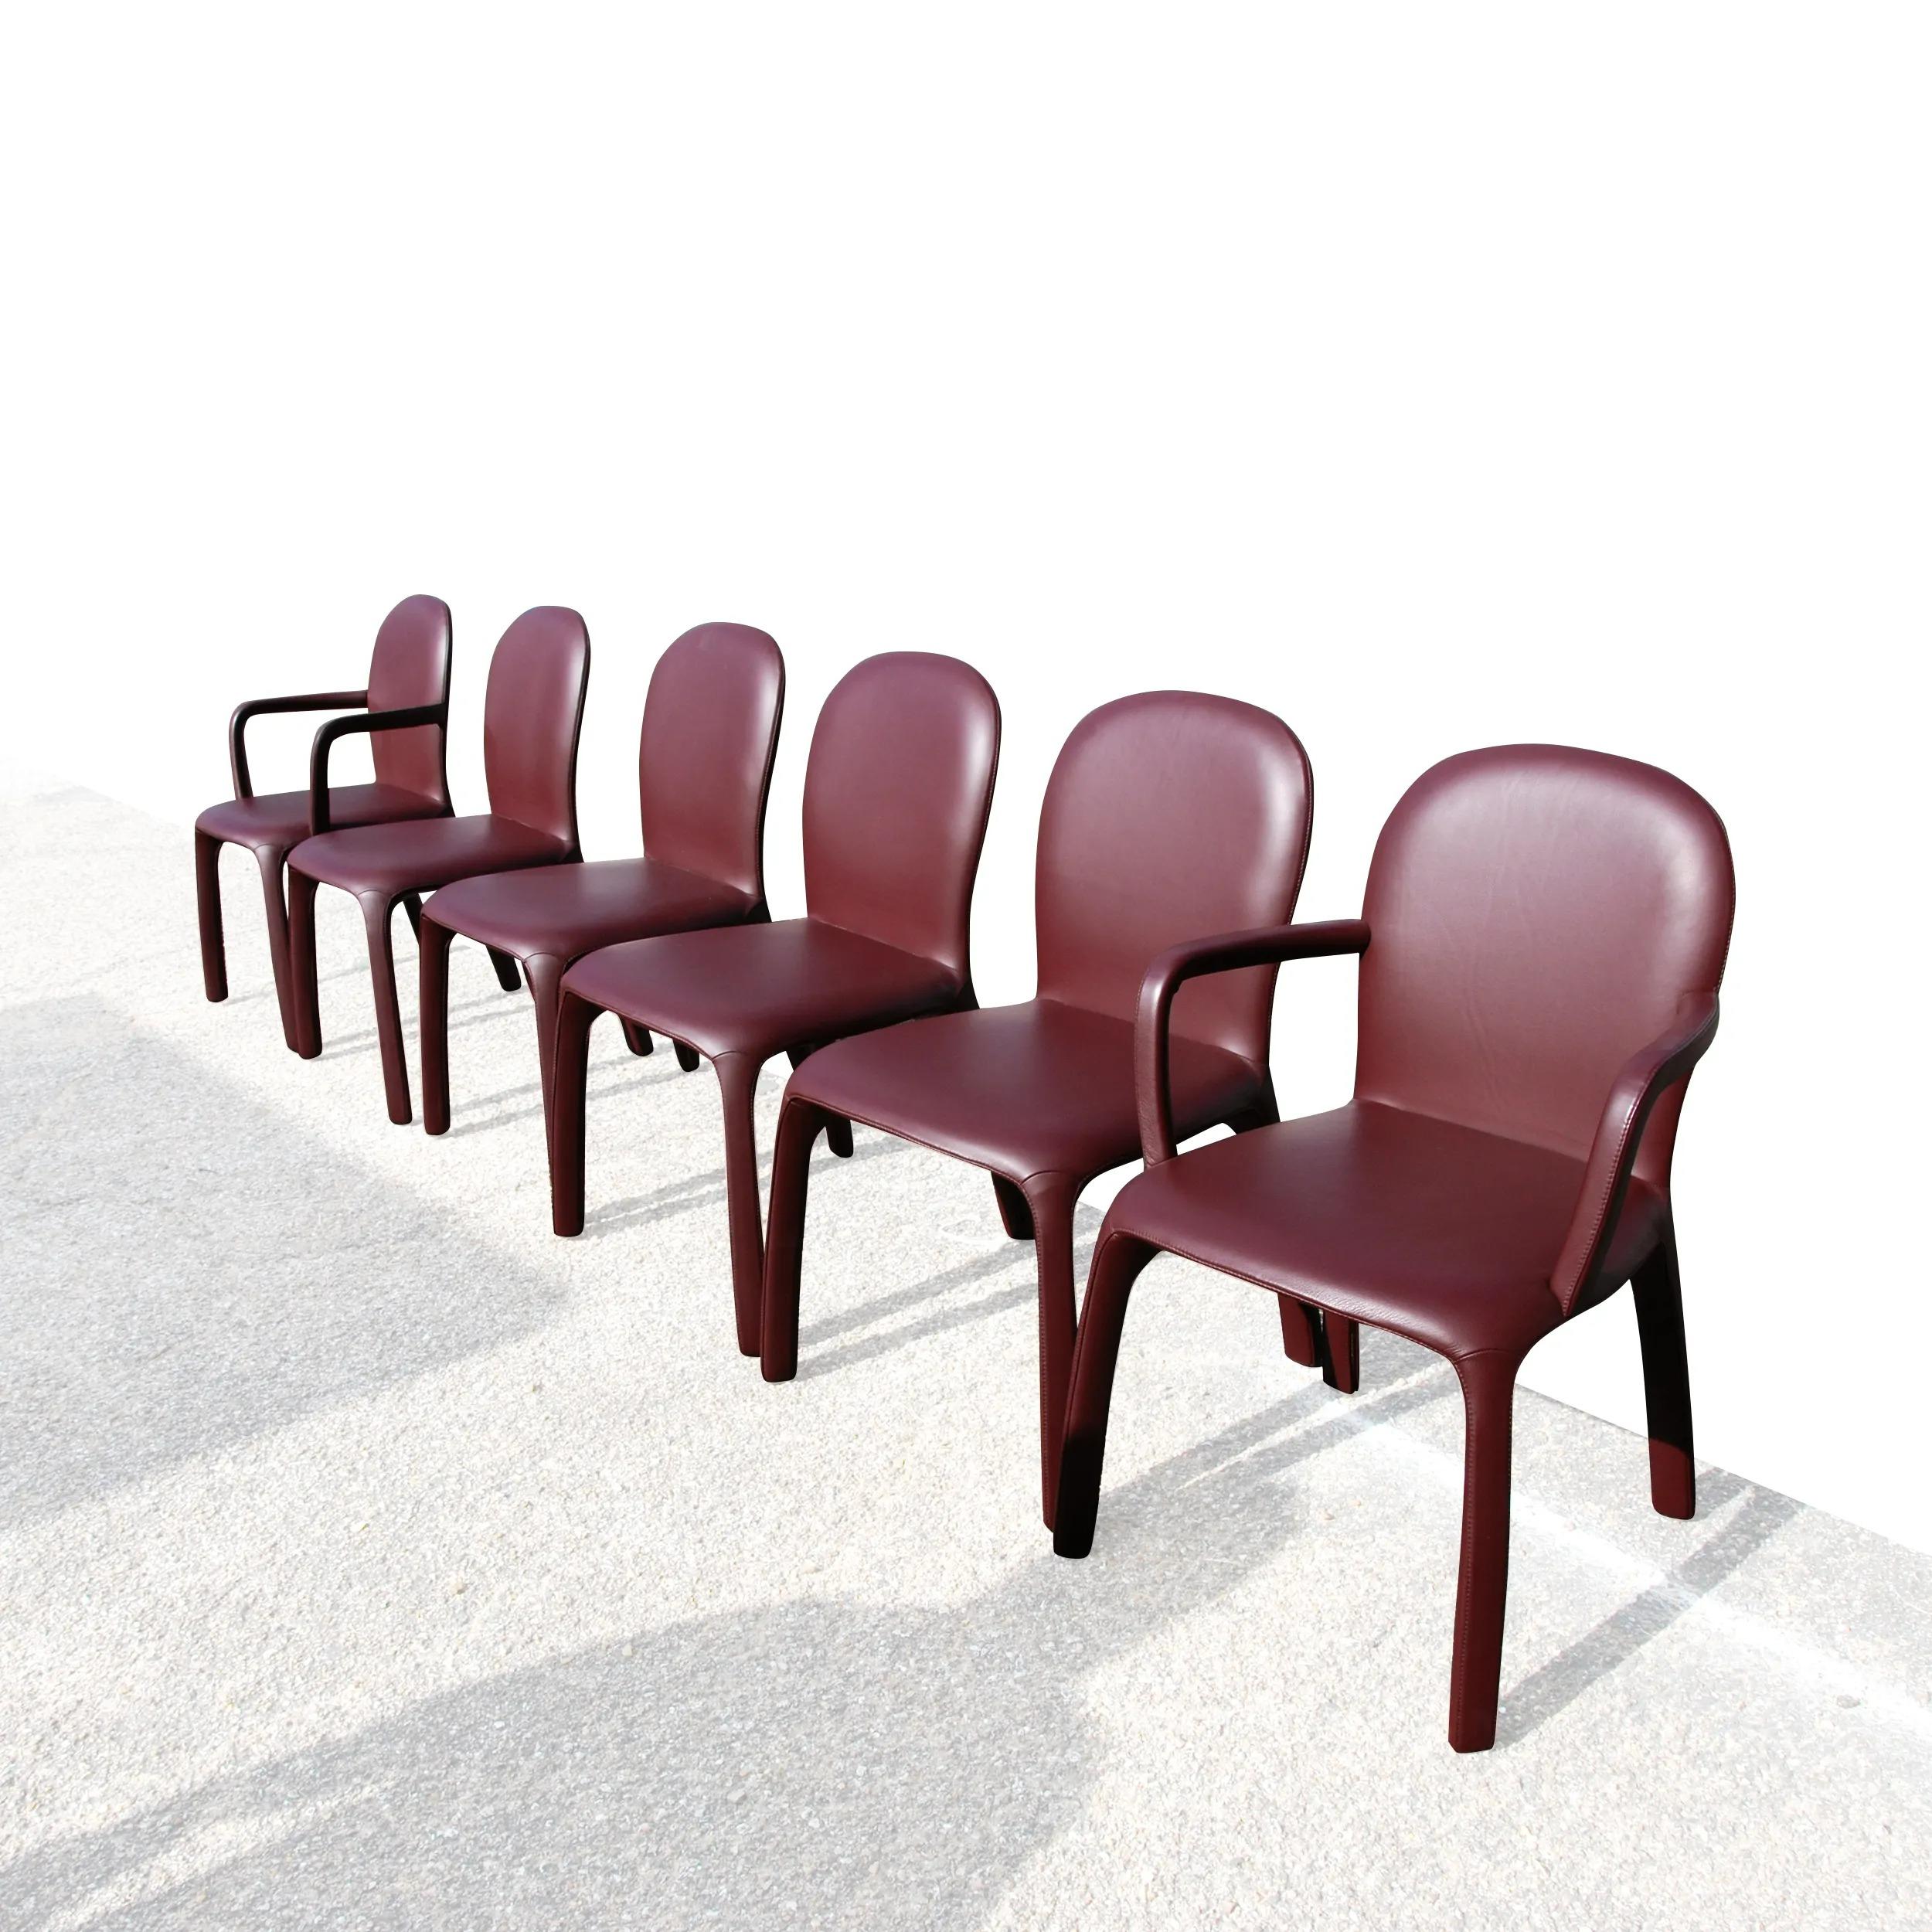 Set of 6 “Amelie” Claudio Bellini chairs for Poltrona Frau.

These chairs encompass simple forms and precious materials In a natural yet sophisticated style. 

Set of six chairs including four side and two arm chairs in a rich burgundy leather.